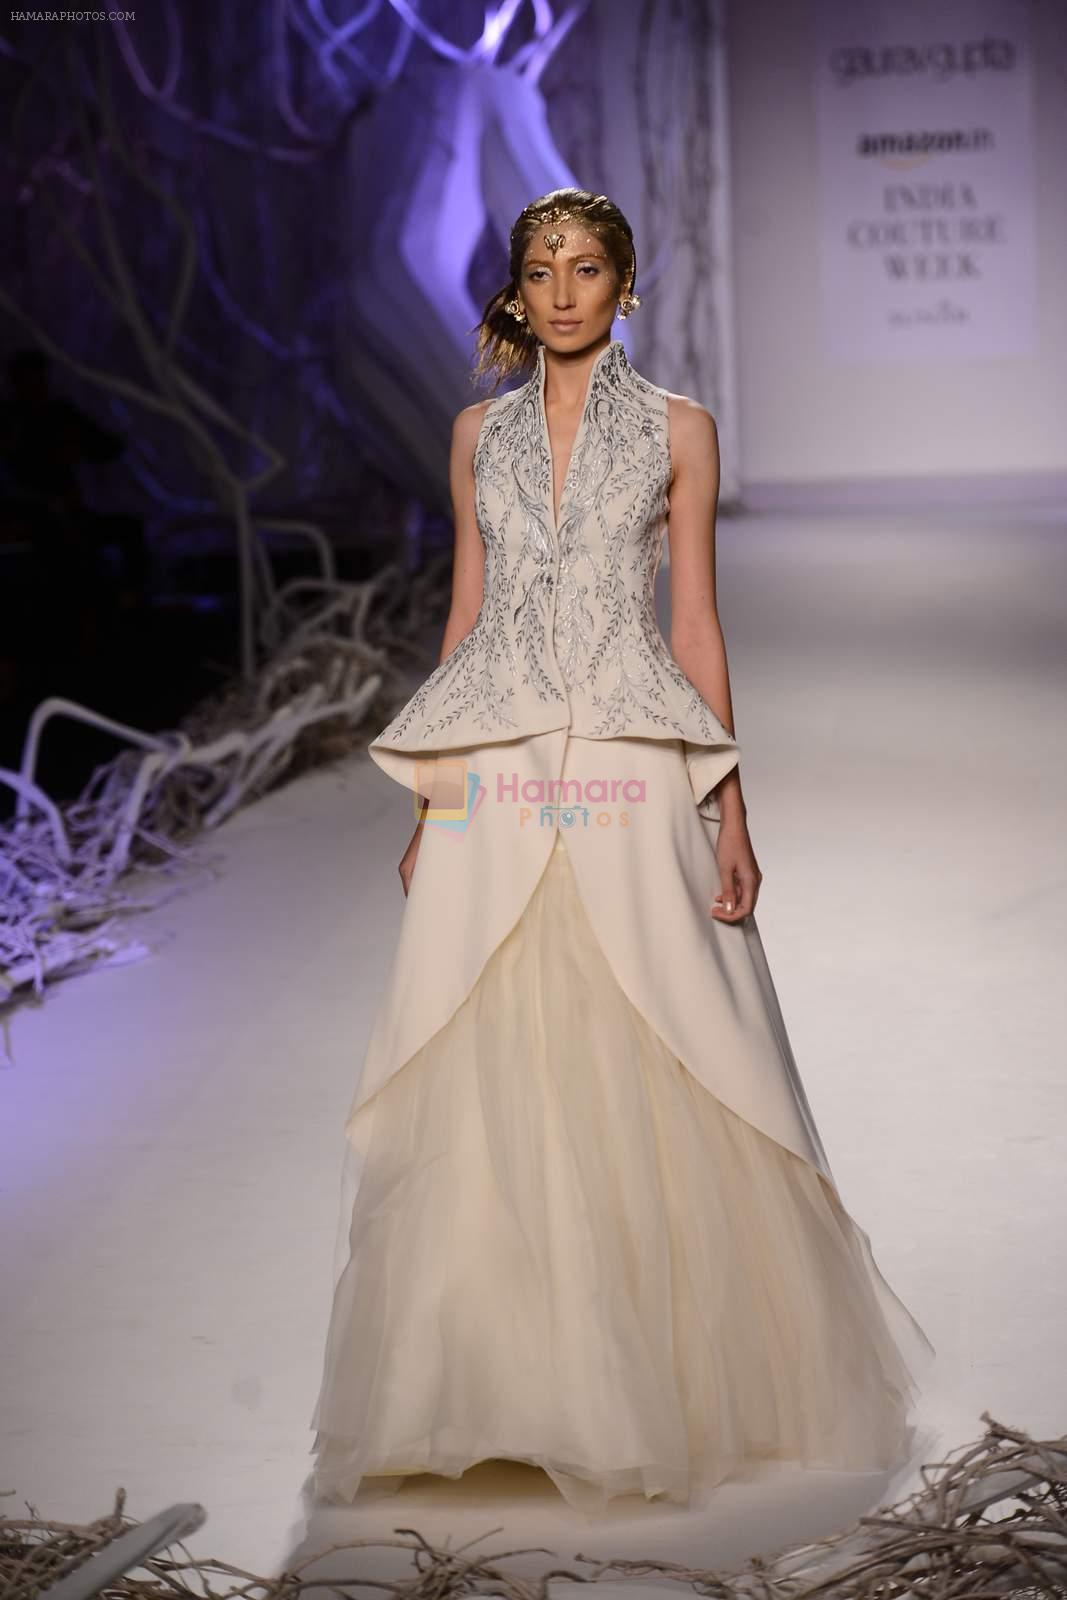 Model walks for Gaurav Gupta at India Couture week day 2 on 30th July 2015